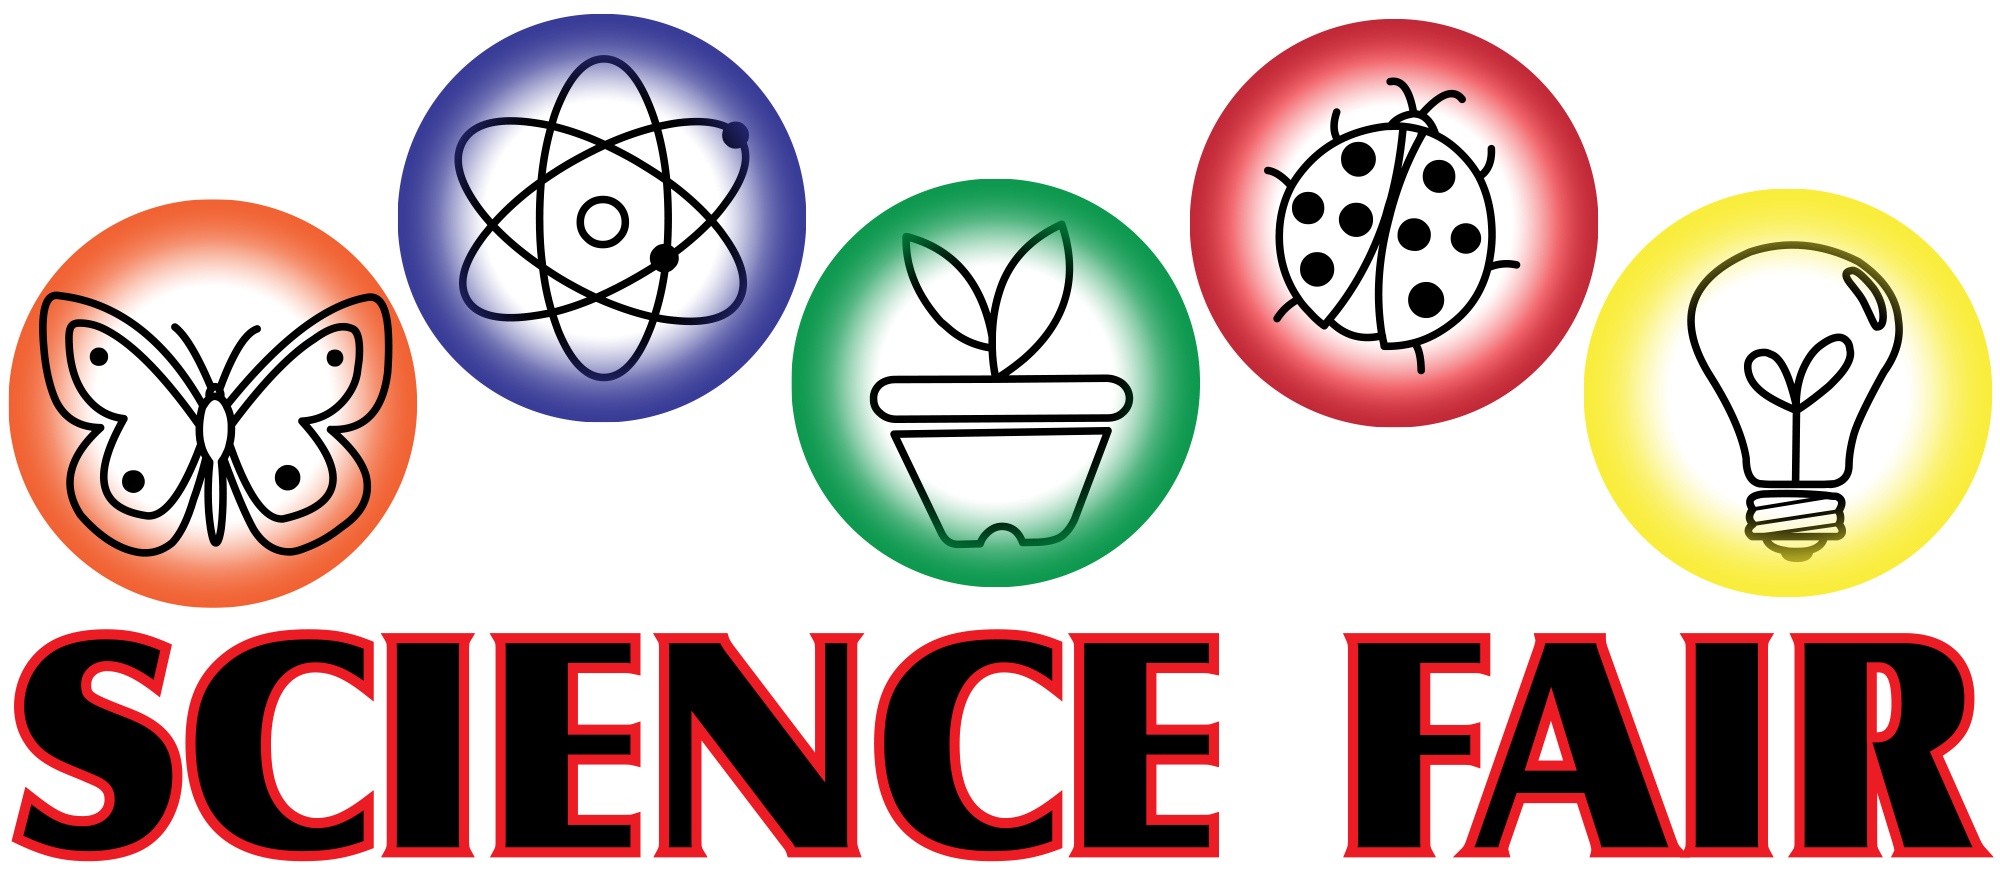 pin Scientist clipart science